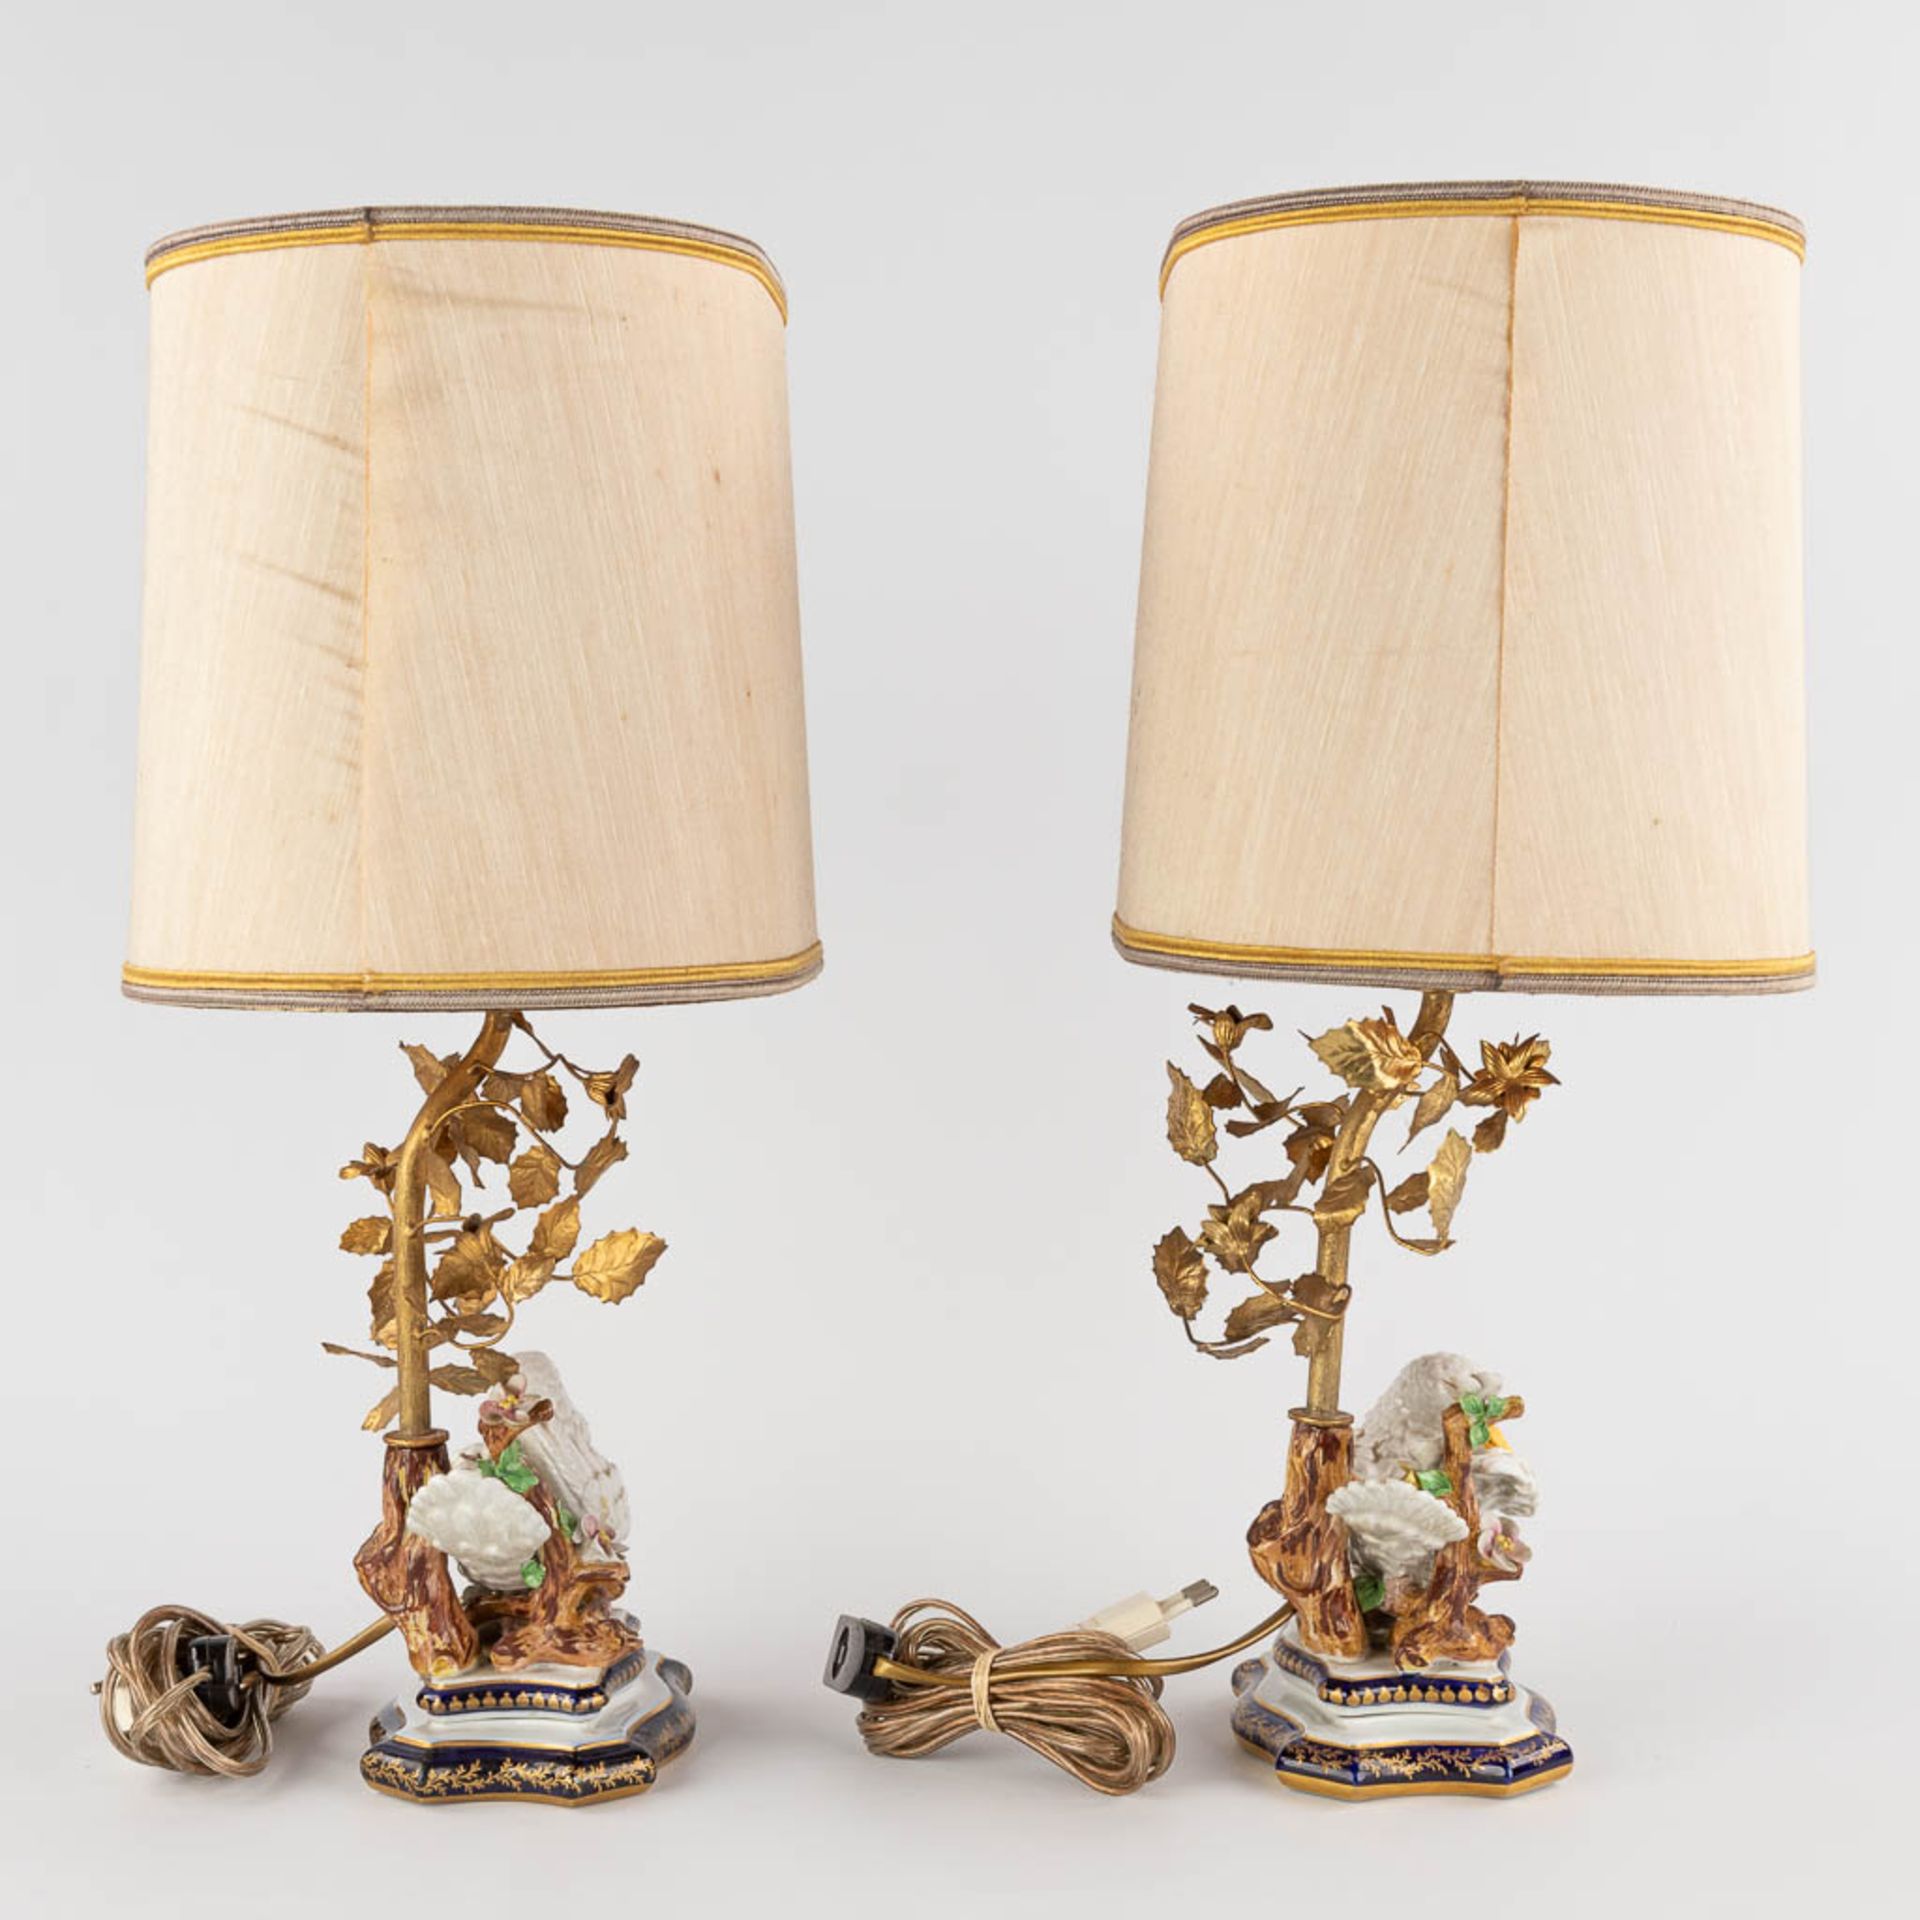 A pair of porcelain and metal table lamps decorated with birds, Sèvres marks. 20th C. (D:12 x W:15 x - Bild 5 aus 11